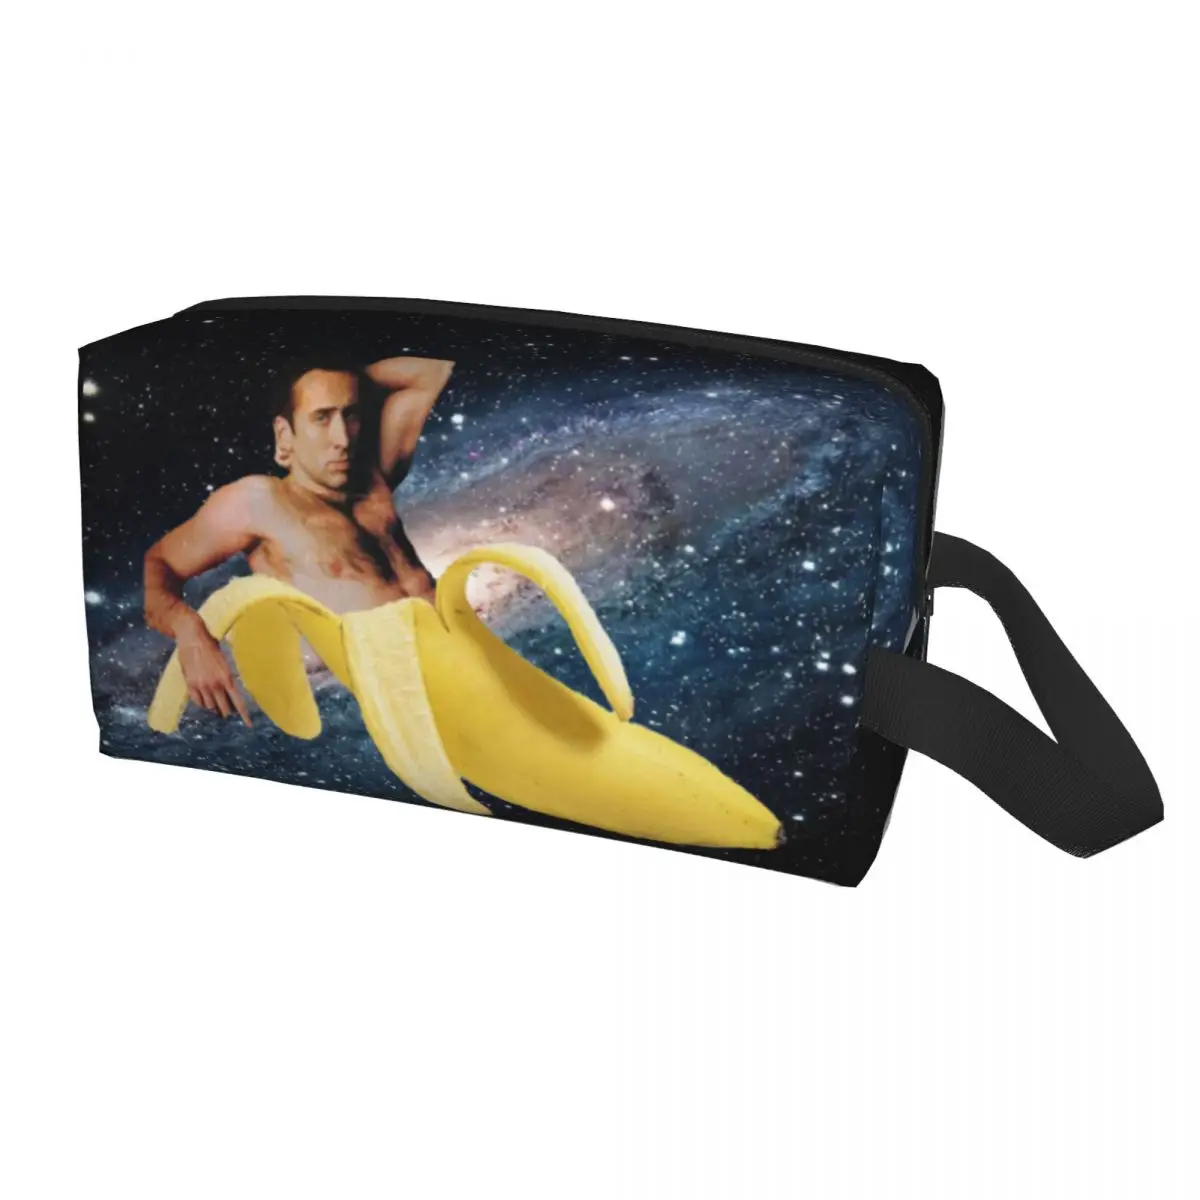 

Travel Nicolas Cage In A Banana Toiletry Bag Portable Space Cosmetic Makeup Organizer for Women Beauty Storage Dopp Kit Case